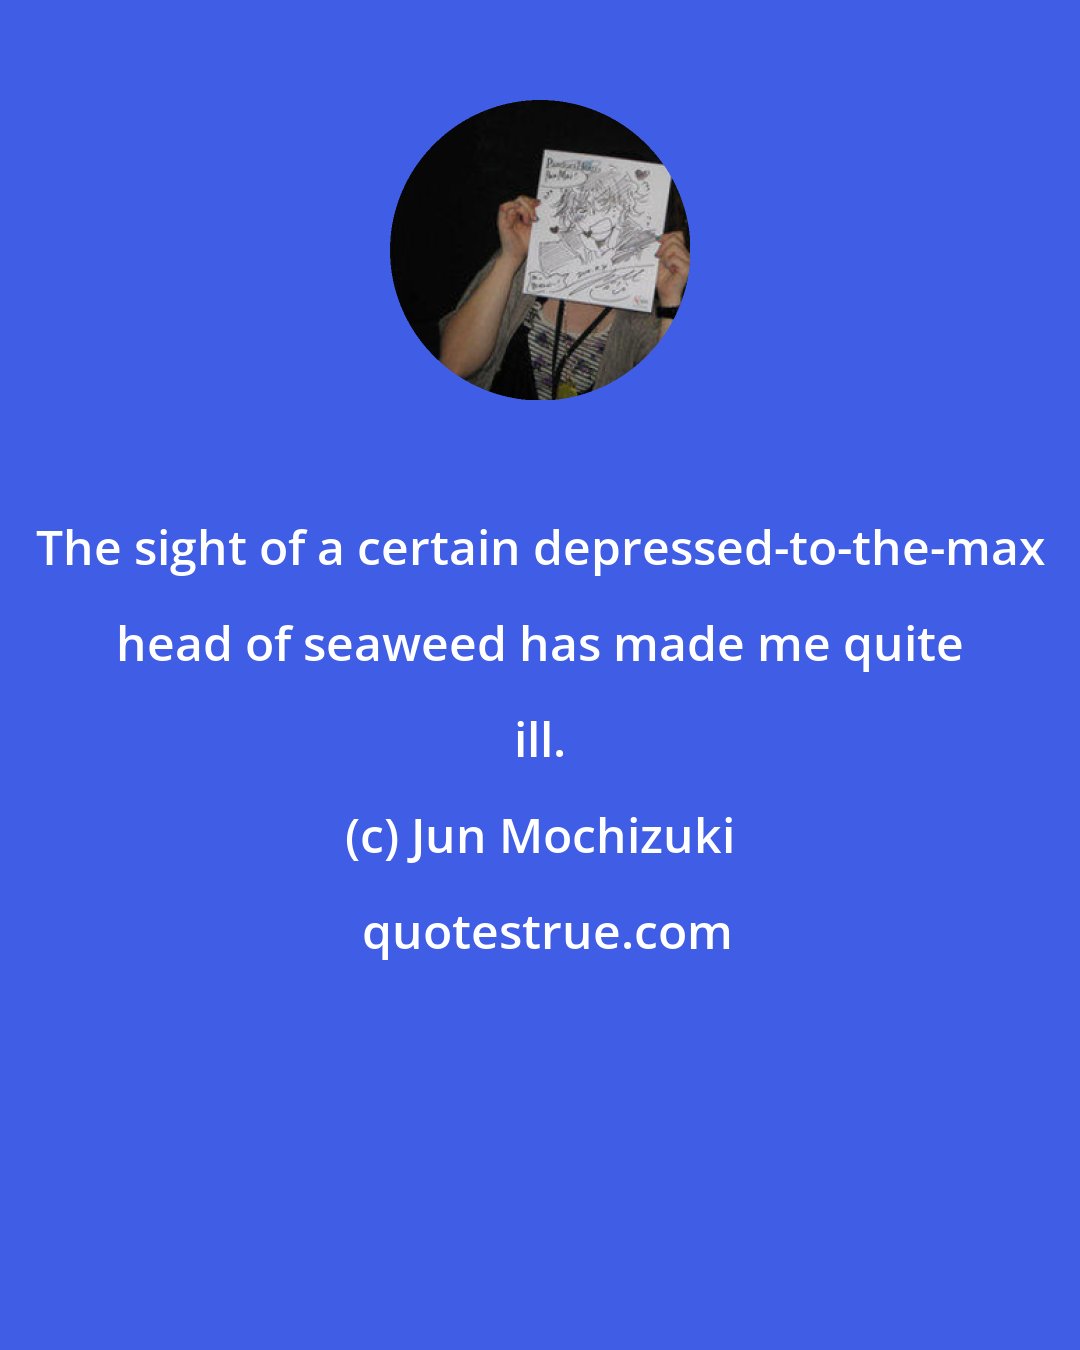 Jun Mochizuki: The sight of a certain depressed-to-the-max head of seaweed has made me quite ill.